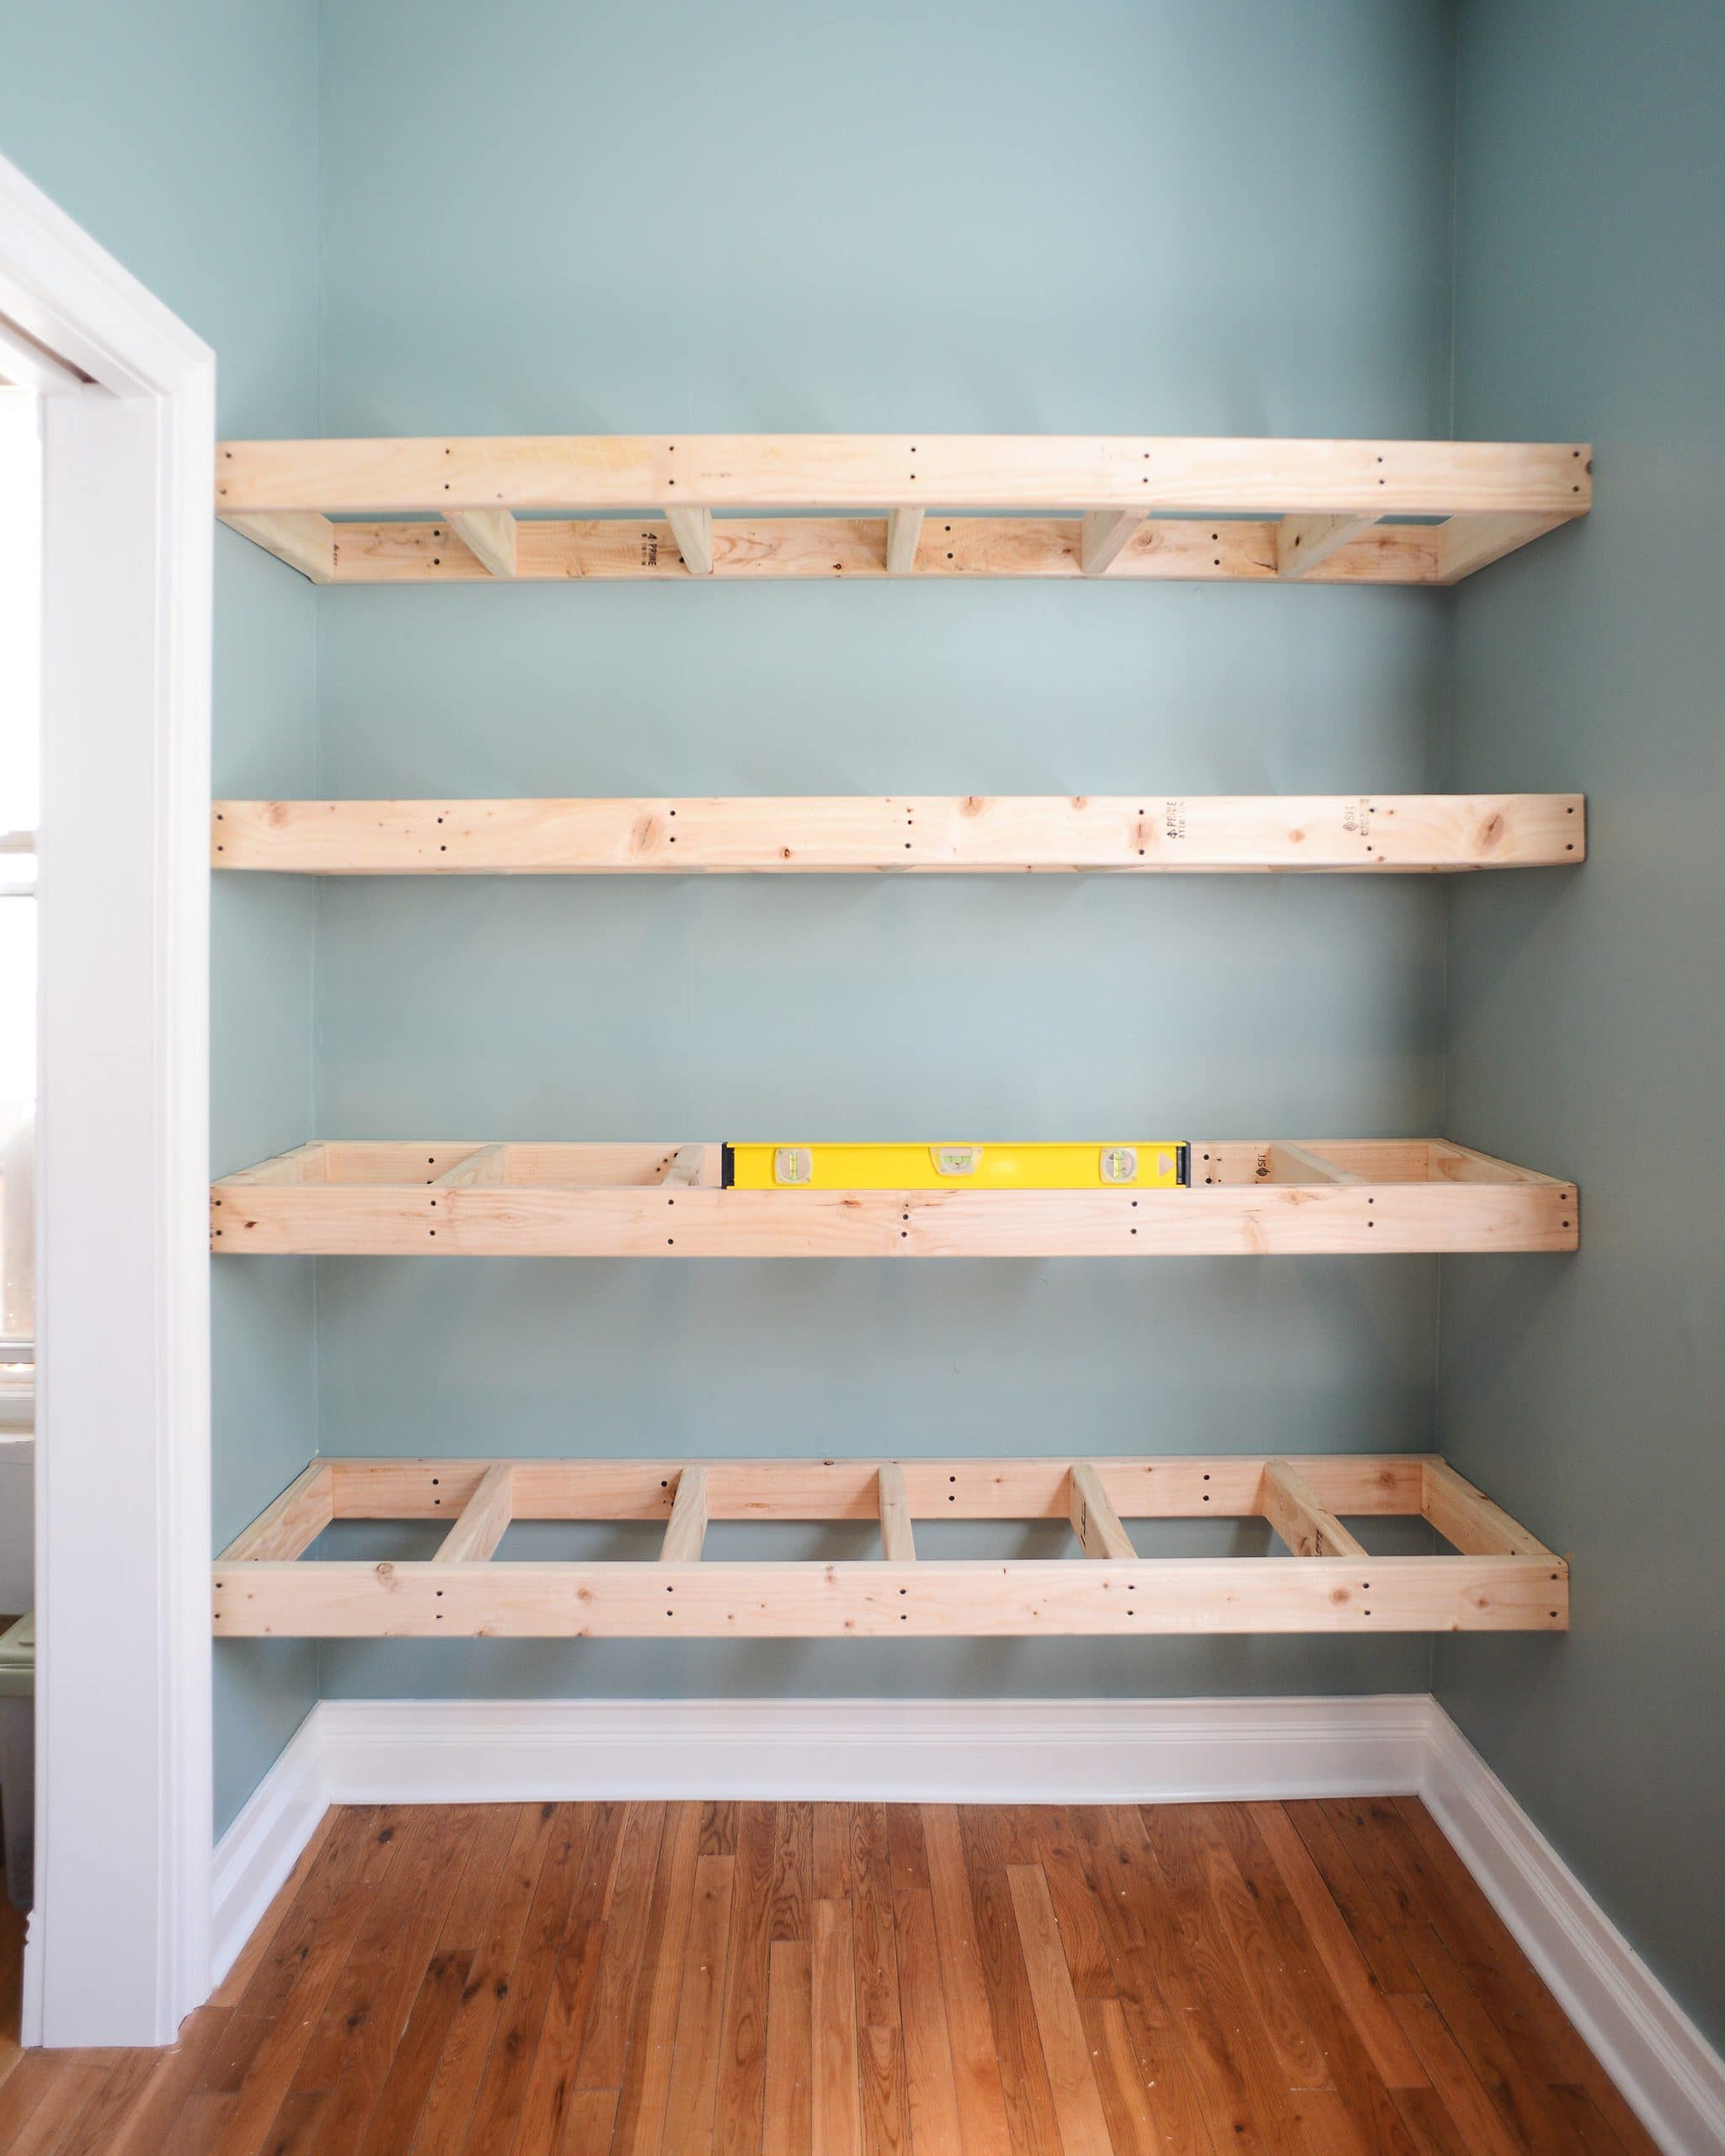 Always level when installing floating shelves. Level, level, level! | head to Yellow Brick Home for the step-by-step floating shelf tutorial!